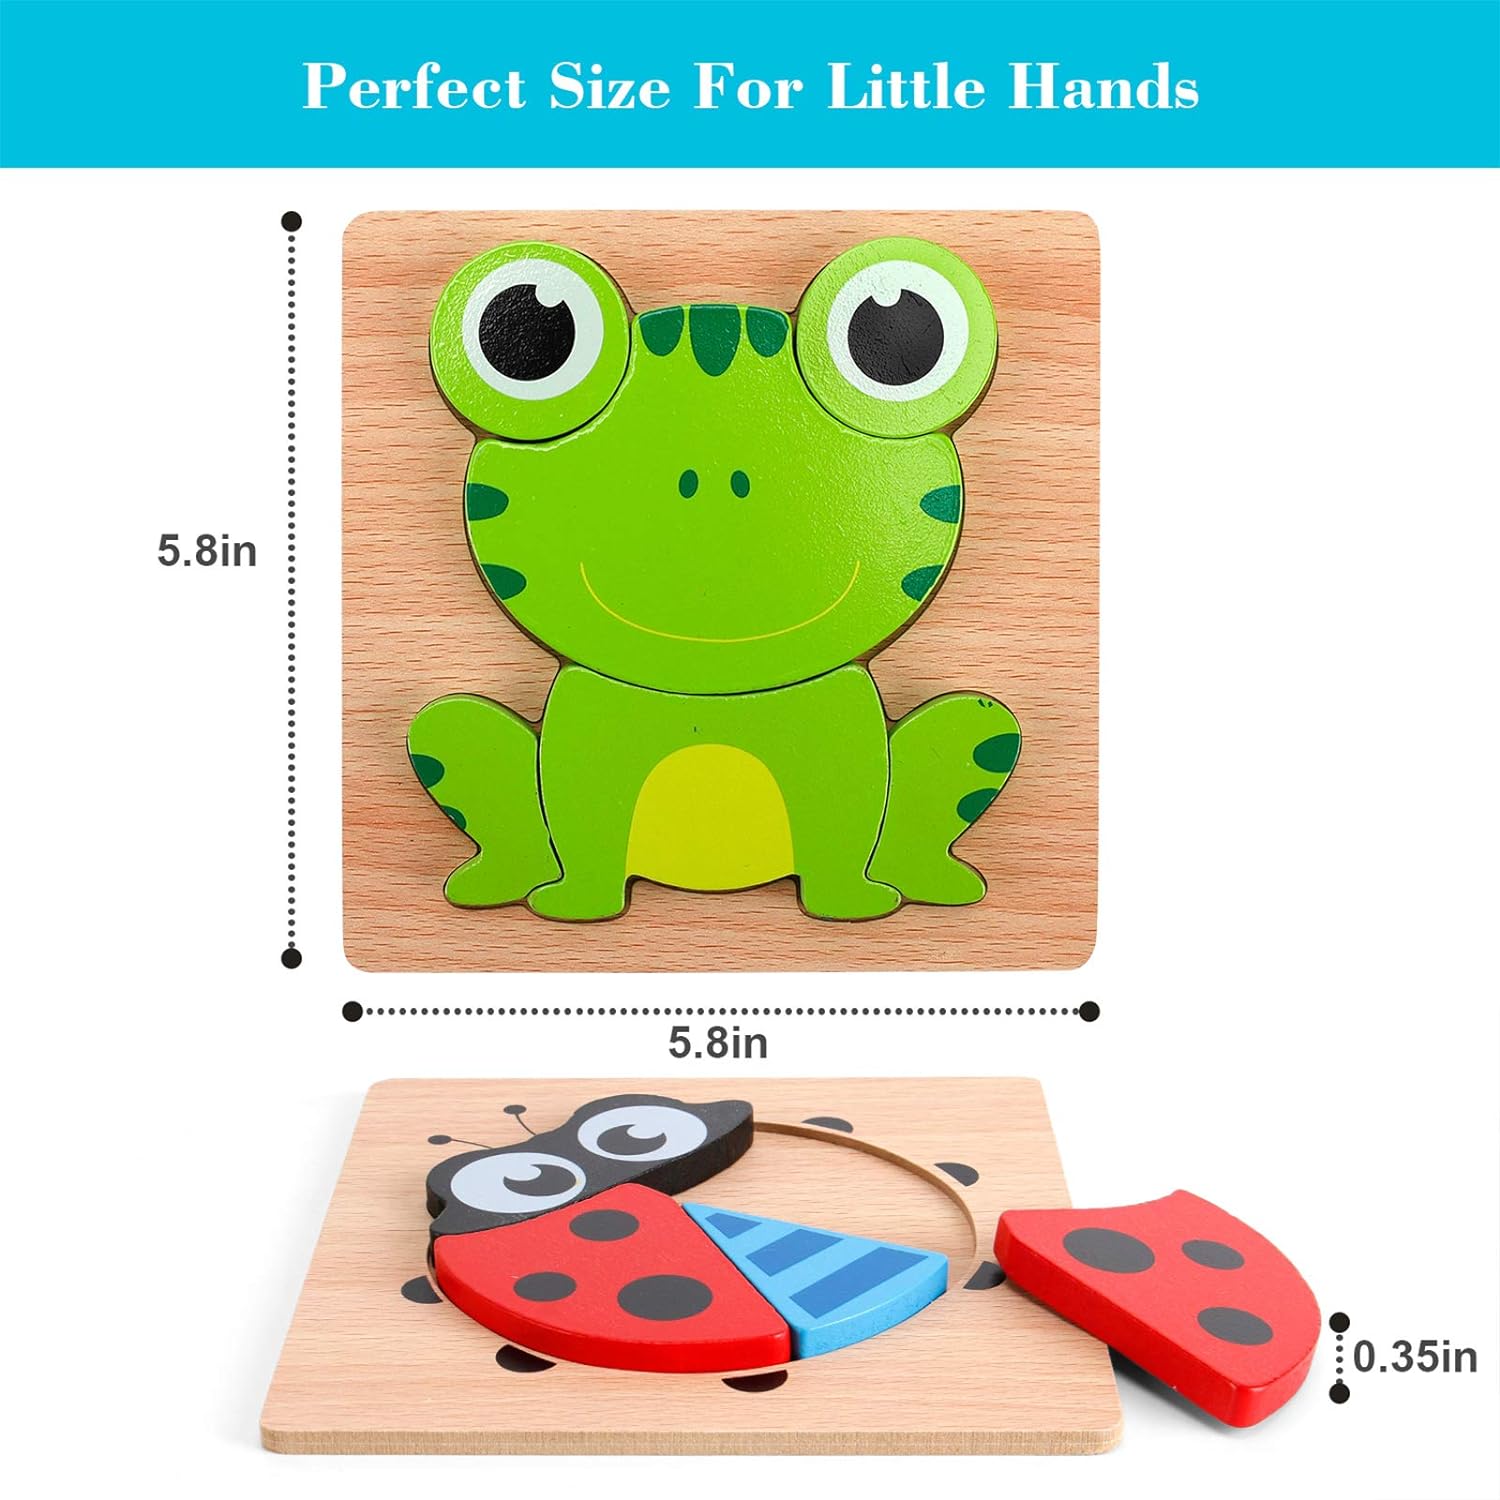 Slotic Wooden Puzzles for Toddlers - A Fun and Educational Toy Review